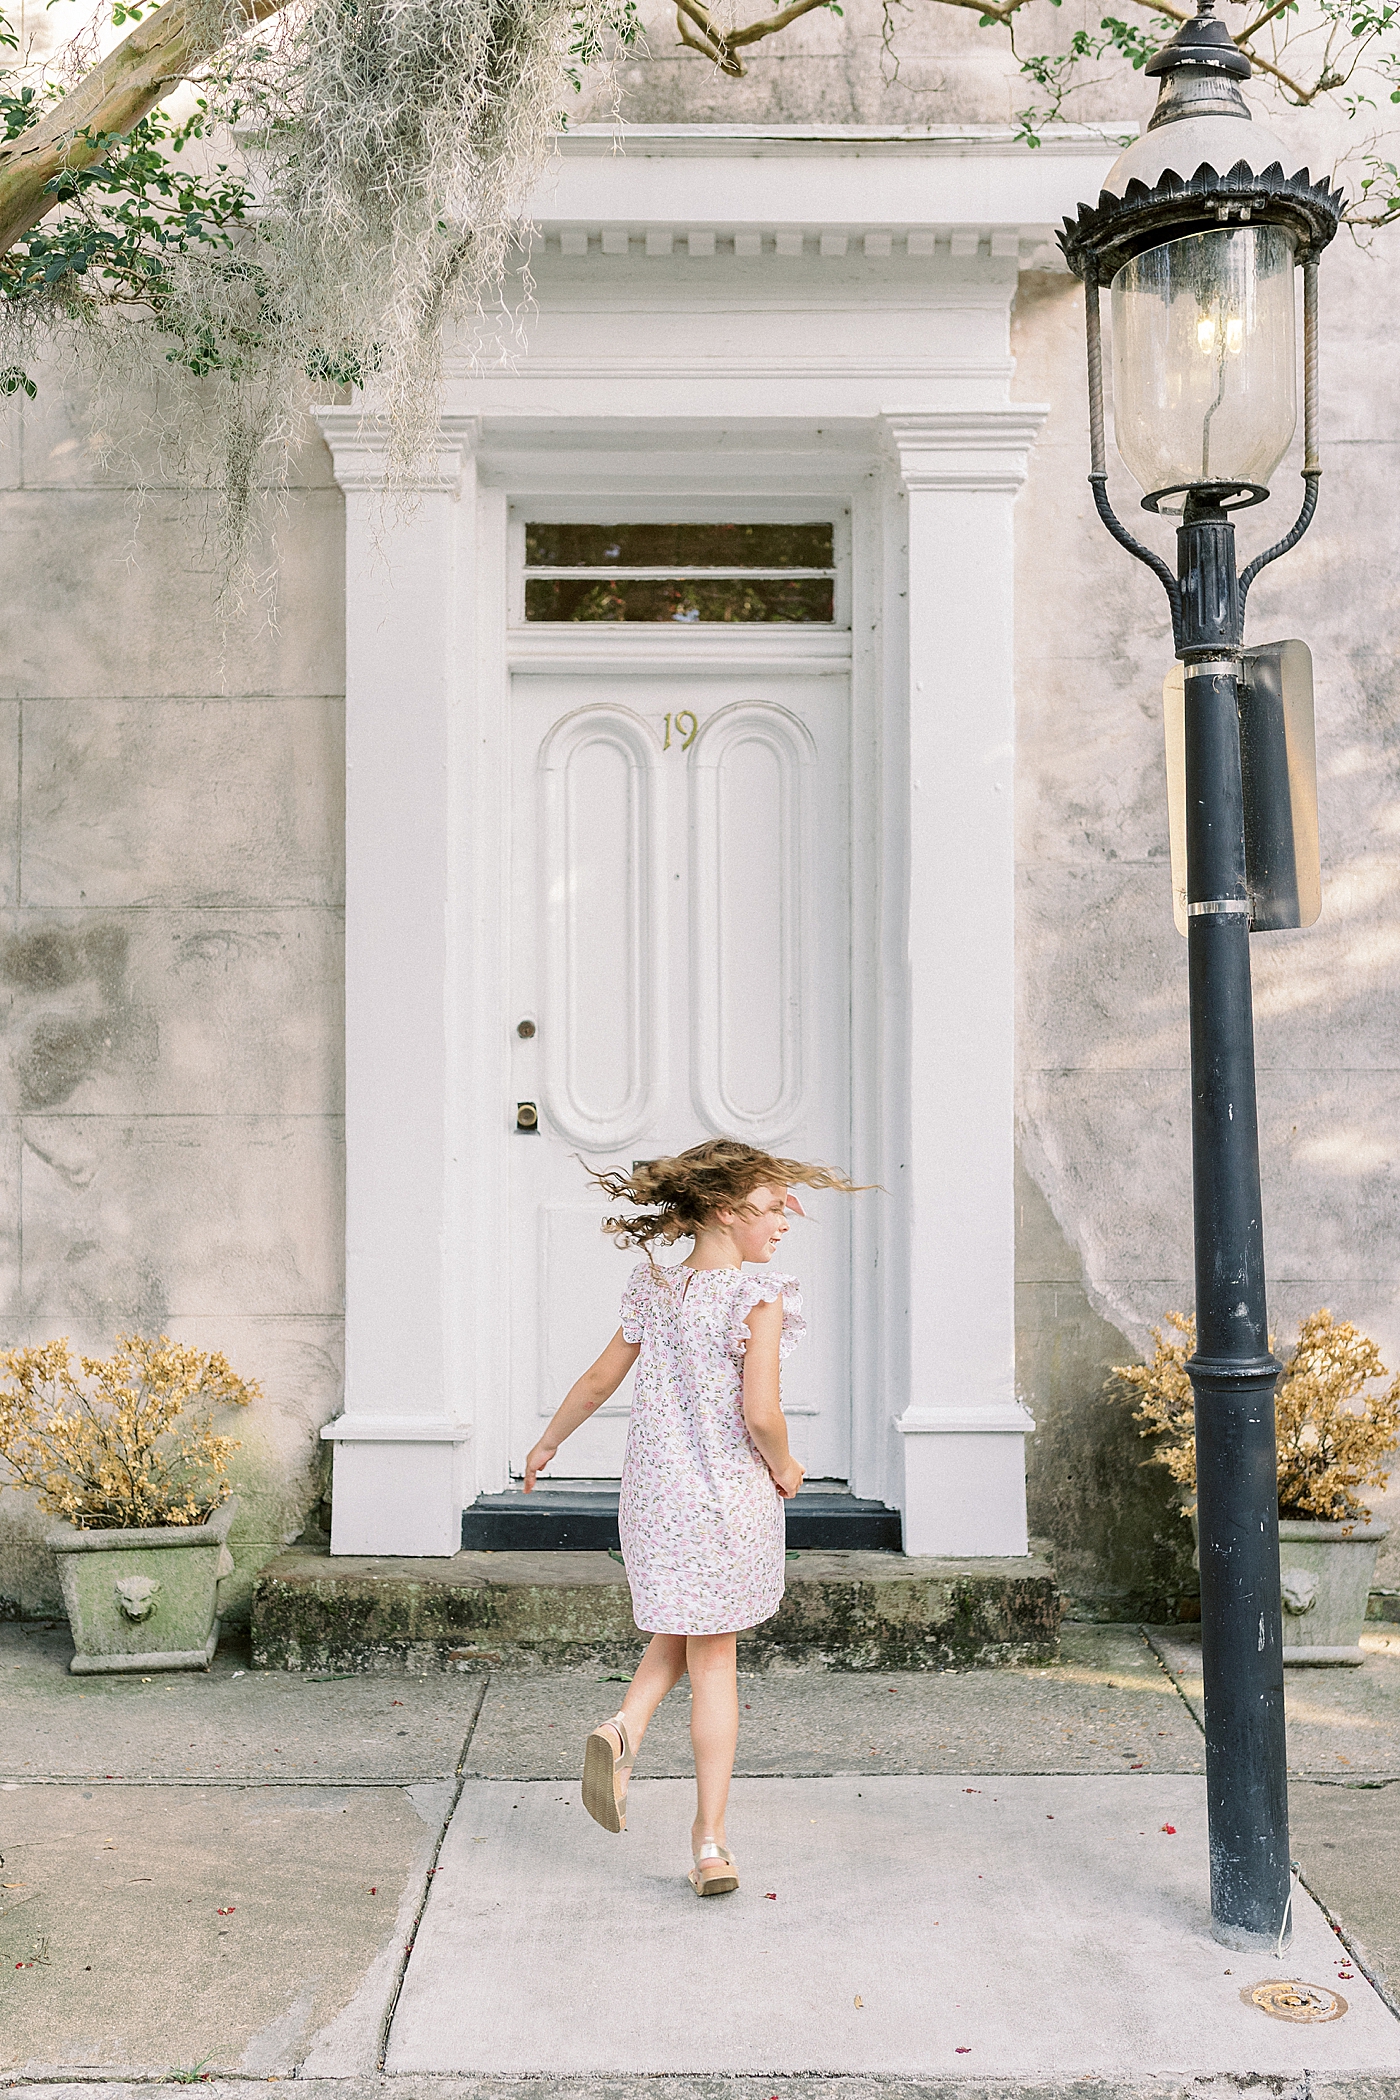 Little girl in a floral dress twirling | Photo by Caitlyn Motycka Photography